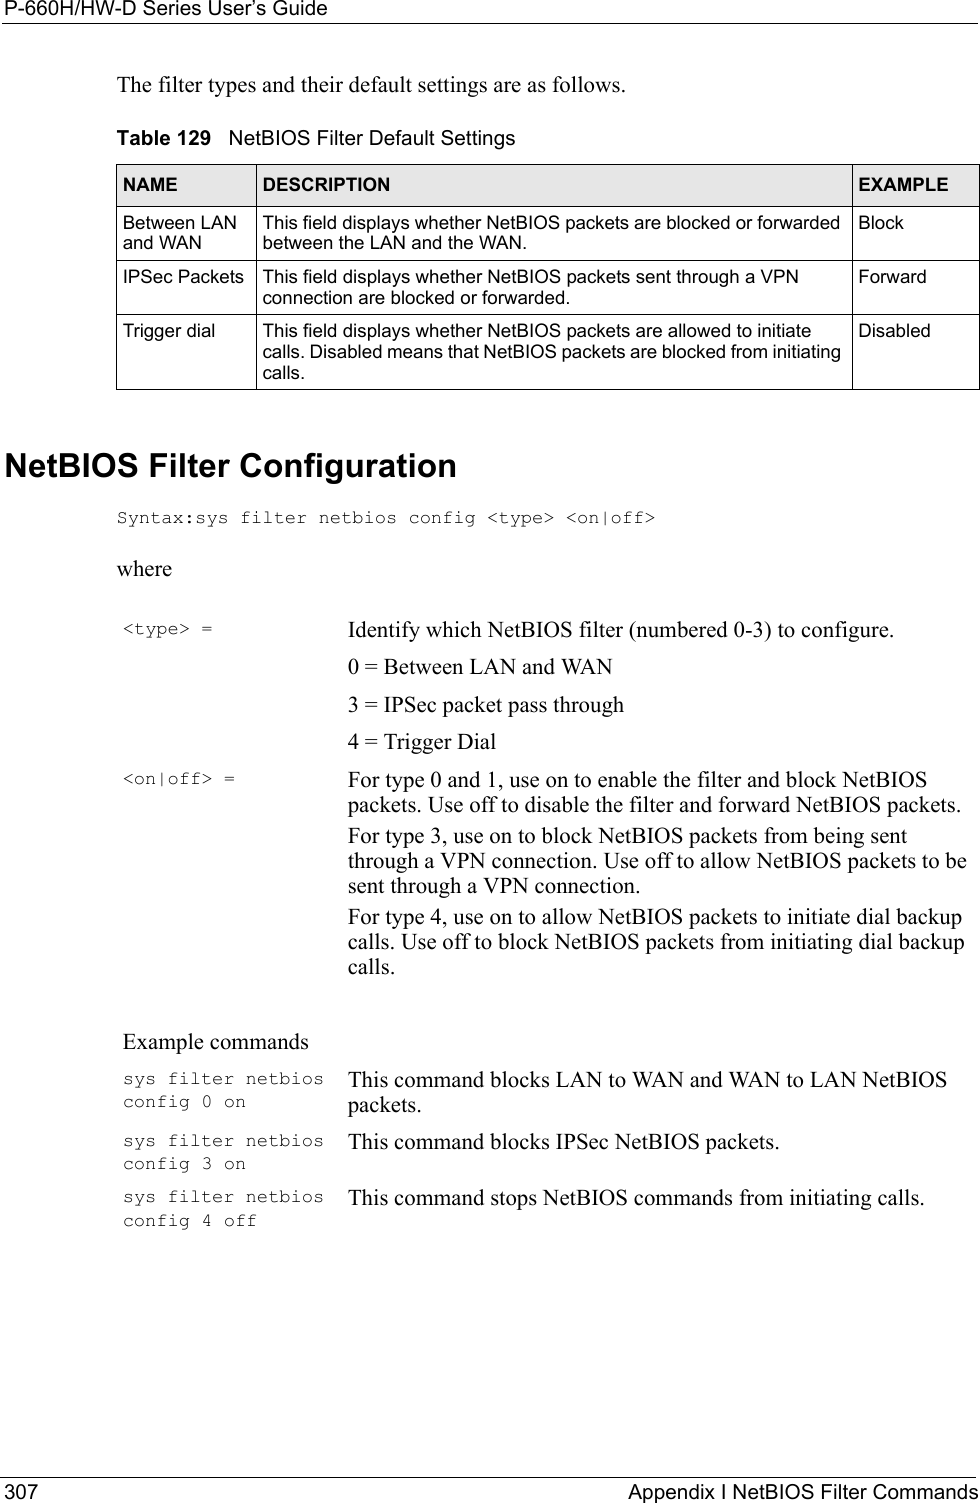 P-660H/HW-D Series User’s Guide307 Appendix I NetBIOS Filter CommandsThe filter types and their default settings are as follows.NetBIOS Filter ConfigurationSyntax:sys filter netbios config &lt;type&gt; &lt;on|off&gt;whereTable 129   NetBIOS Filter Default SettingsNAME DESCRIPTION EXAMPLEBetween LAN and WANThis field displays whether NetBIOS packets are blocked or forwarded between the LAN and the WAN.BlockIPSec Packets This field displays whether NetBIOS packets sent through a VPN connection are blocked or forwarded. ForwardTrigger dial This field displays whether NetBIOS packets are allowed to initiate calls. Disabled means that NetBIOS packets are blocked from initiating calls.Disabled&lt;type&gt; = Identify which NetBIOS filter (numbered 0-3) to configure.0 = Between LAN and WAN3 = IPSec packet pass through4 = Trigger Dial&lt;on|off&gt; = For type 0 and 1, use on to enable the filter and block NetBIOS packets. Use off to disable the filter and forward NetBIOS packets.For type 3, use on to block NetBIOS packets from being sent through a VPN connection. Use off to allow NetBIOS packets to be sent through a VPN connection.For type 4, use on to allow NetBIOS packets to initiate dial backup calls. Use off to block NetBIOS packets from initiating dial backup calls.Example commandssys filter netbios config 0 onThis command blocks LAN to WAN and WAN to LAN NetBIOS packets.sys filter netbios config 3 onThis command blocks IPSec NetBIOS packets.sys filter netbios config 4 offThis command stops NetBIOS commands from initiating calls.